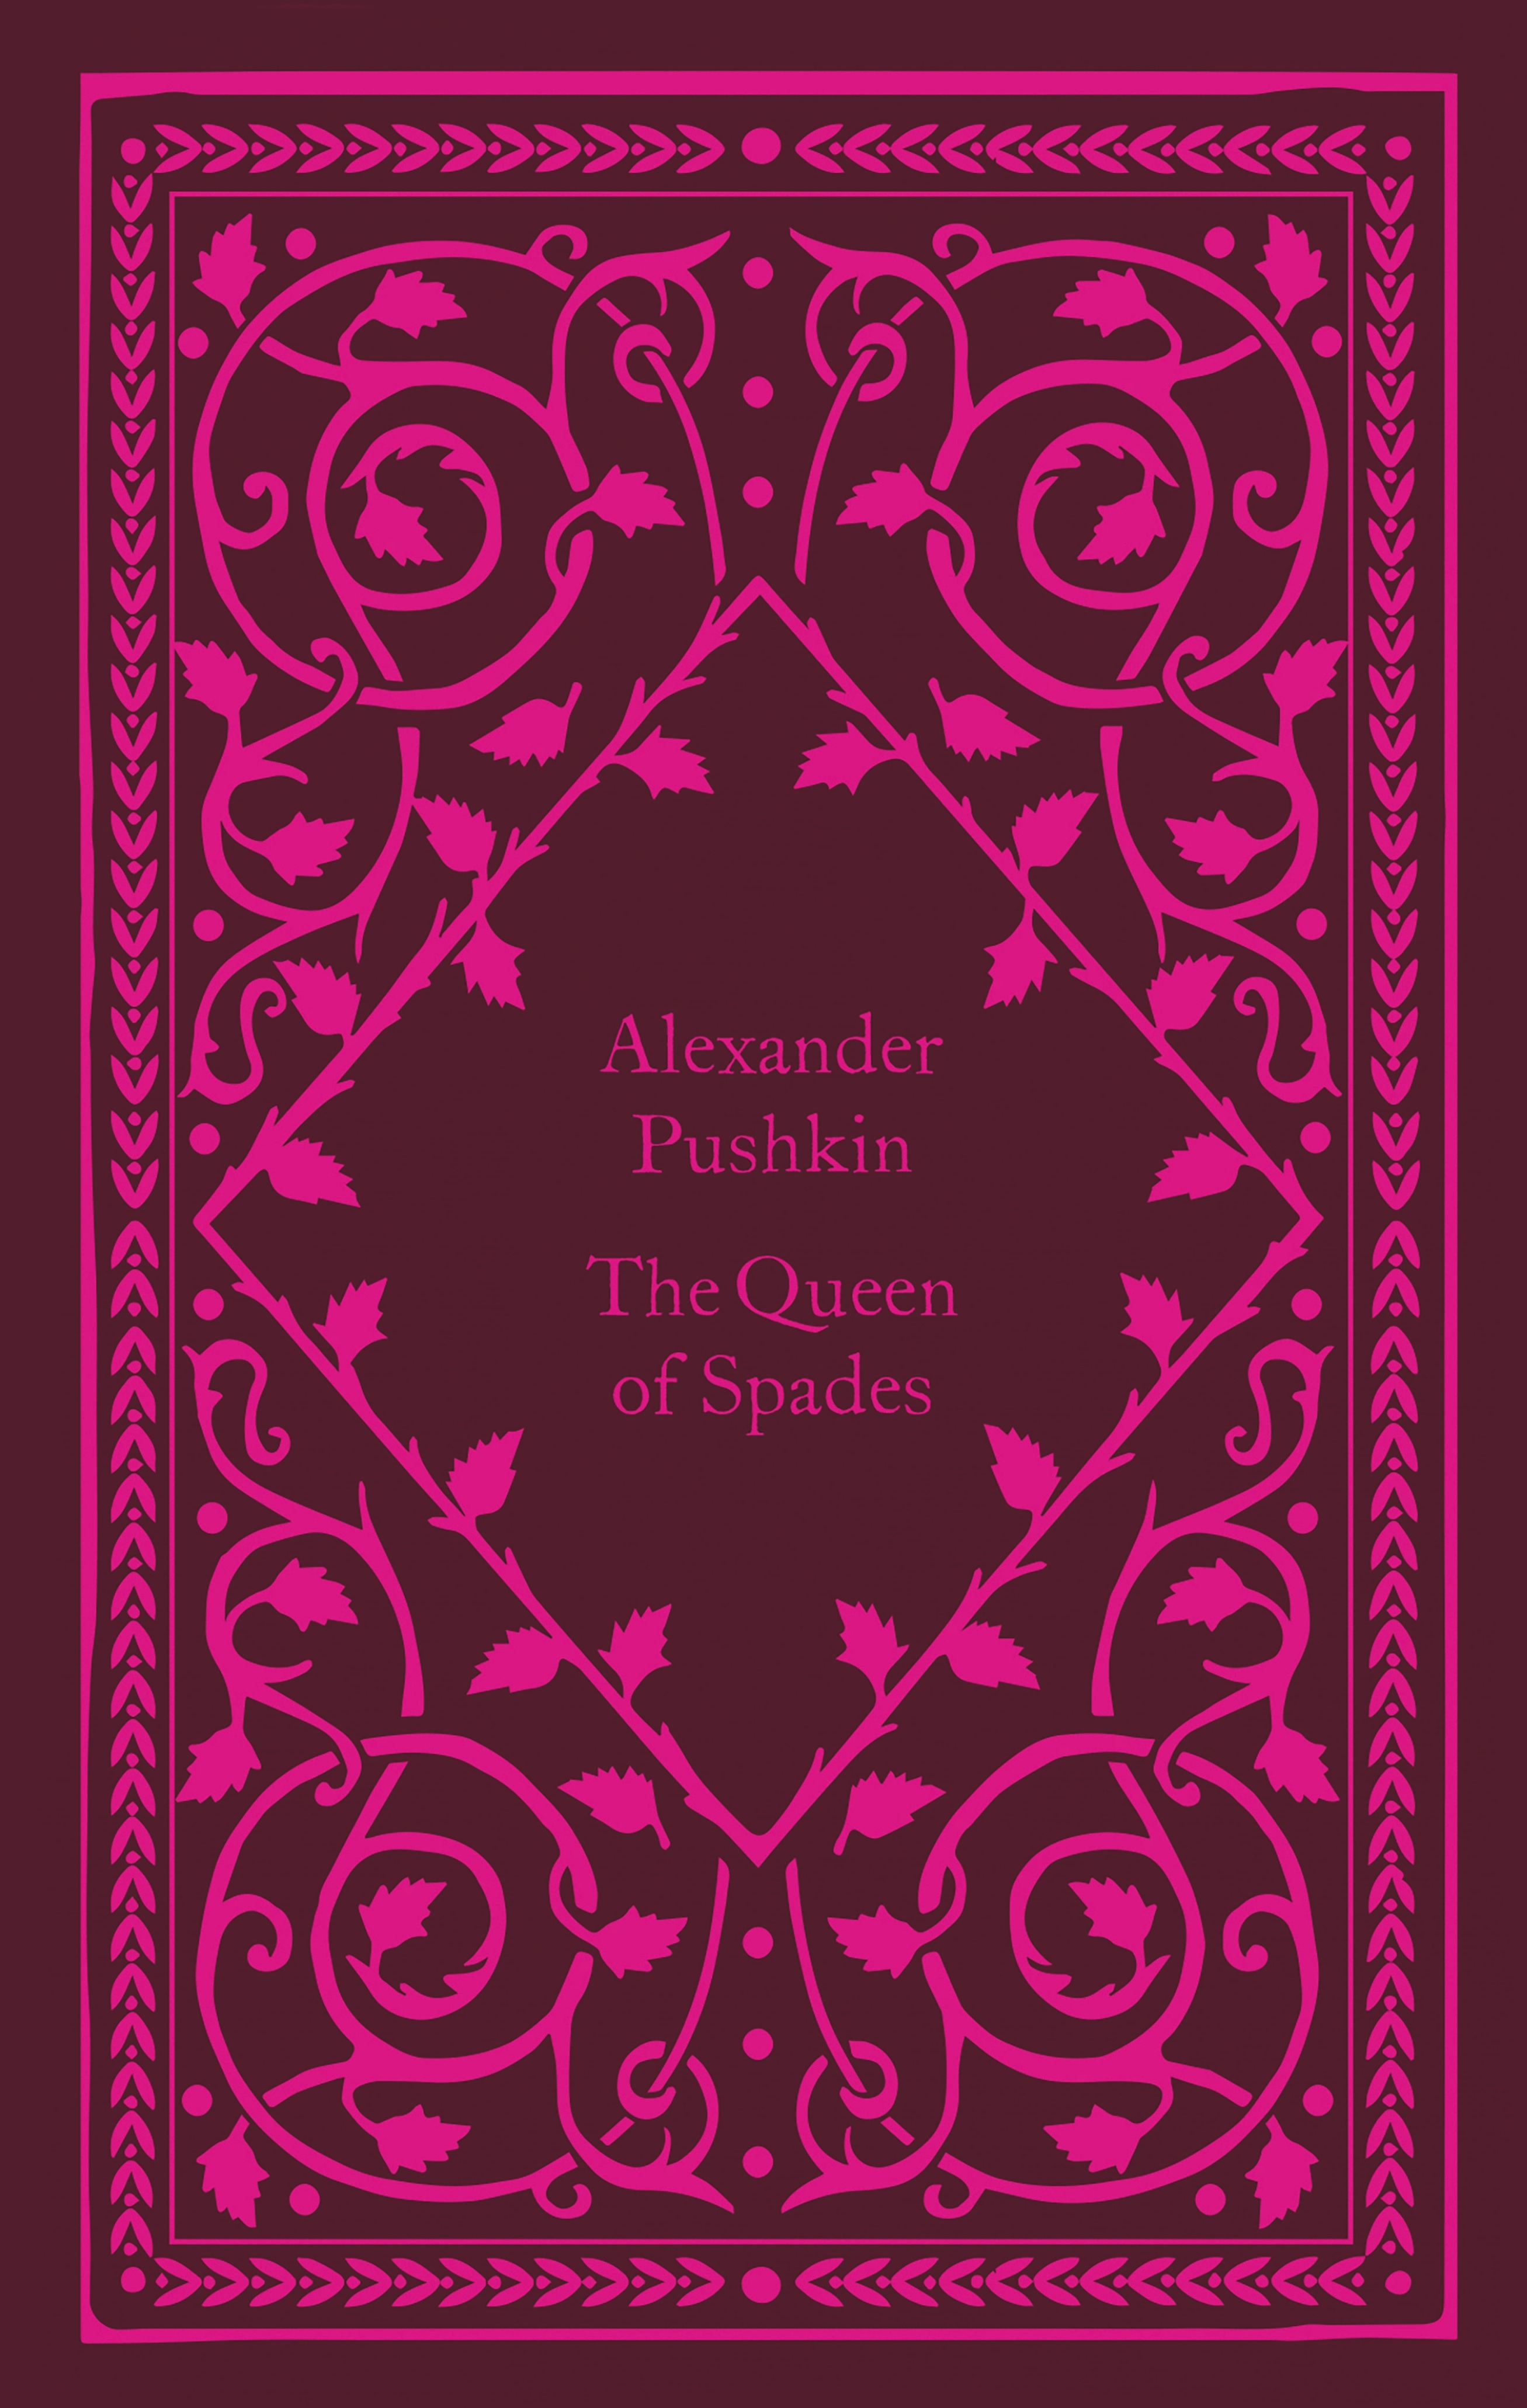 Book “The Queen Of Spades” by Alexander Pushkin — August 25, 2022